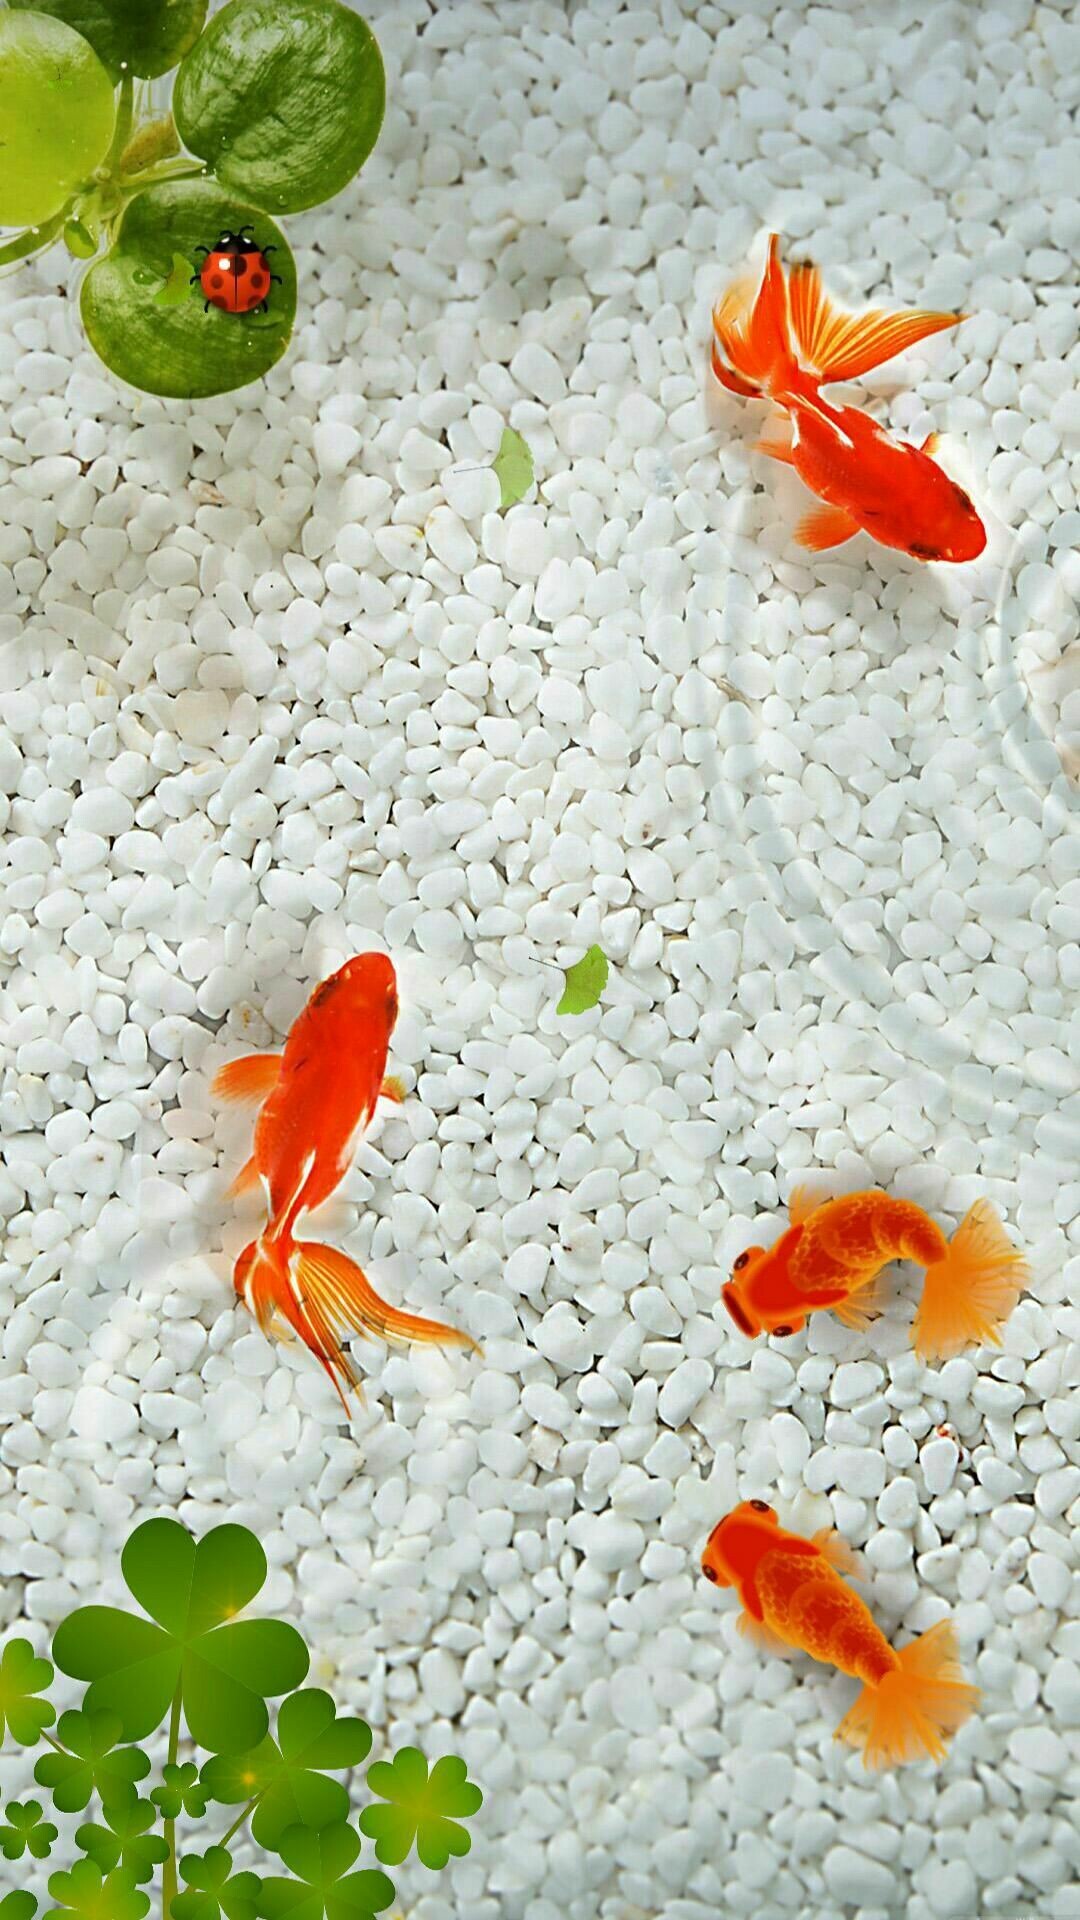 iPhone goldfish wallpapers, Elegant and luxurious, High-resolution images, Golden aquatic beauty, 1080x1920 Full HD Phone